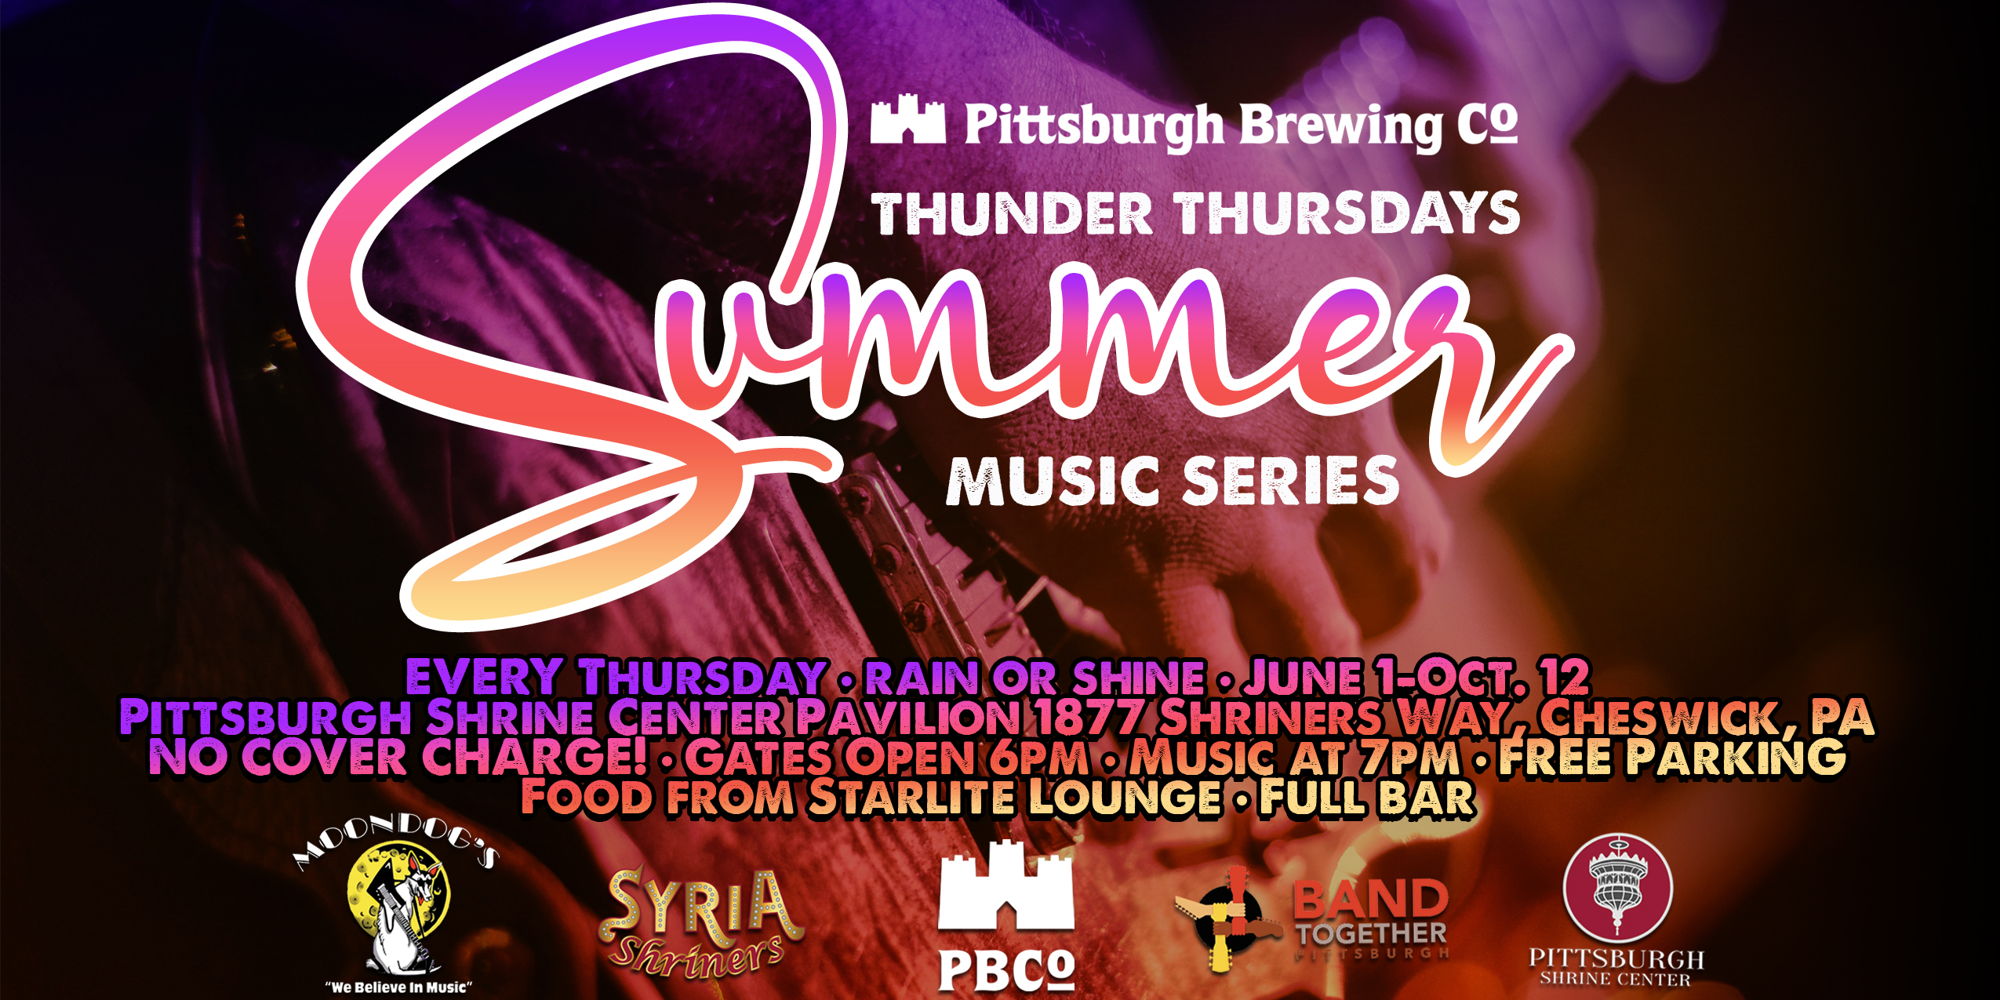 Pittsburgh Brewing Company Thunder Thursdays Summer Music Series promotional image